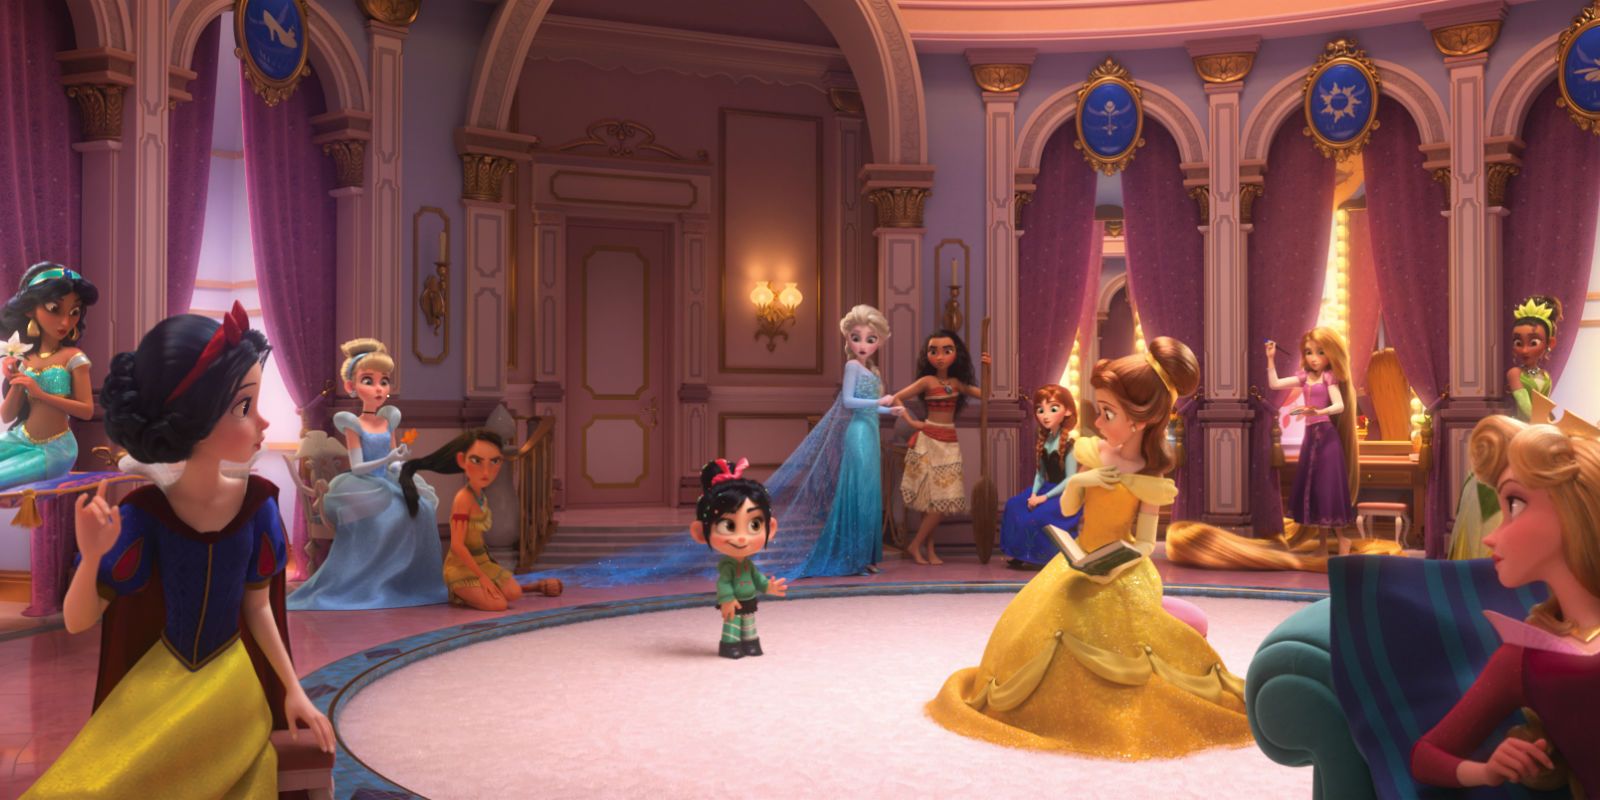 Ralph Breaks the Internet's Disney Princesses Vanellope in a room with other Princesses